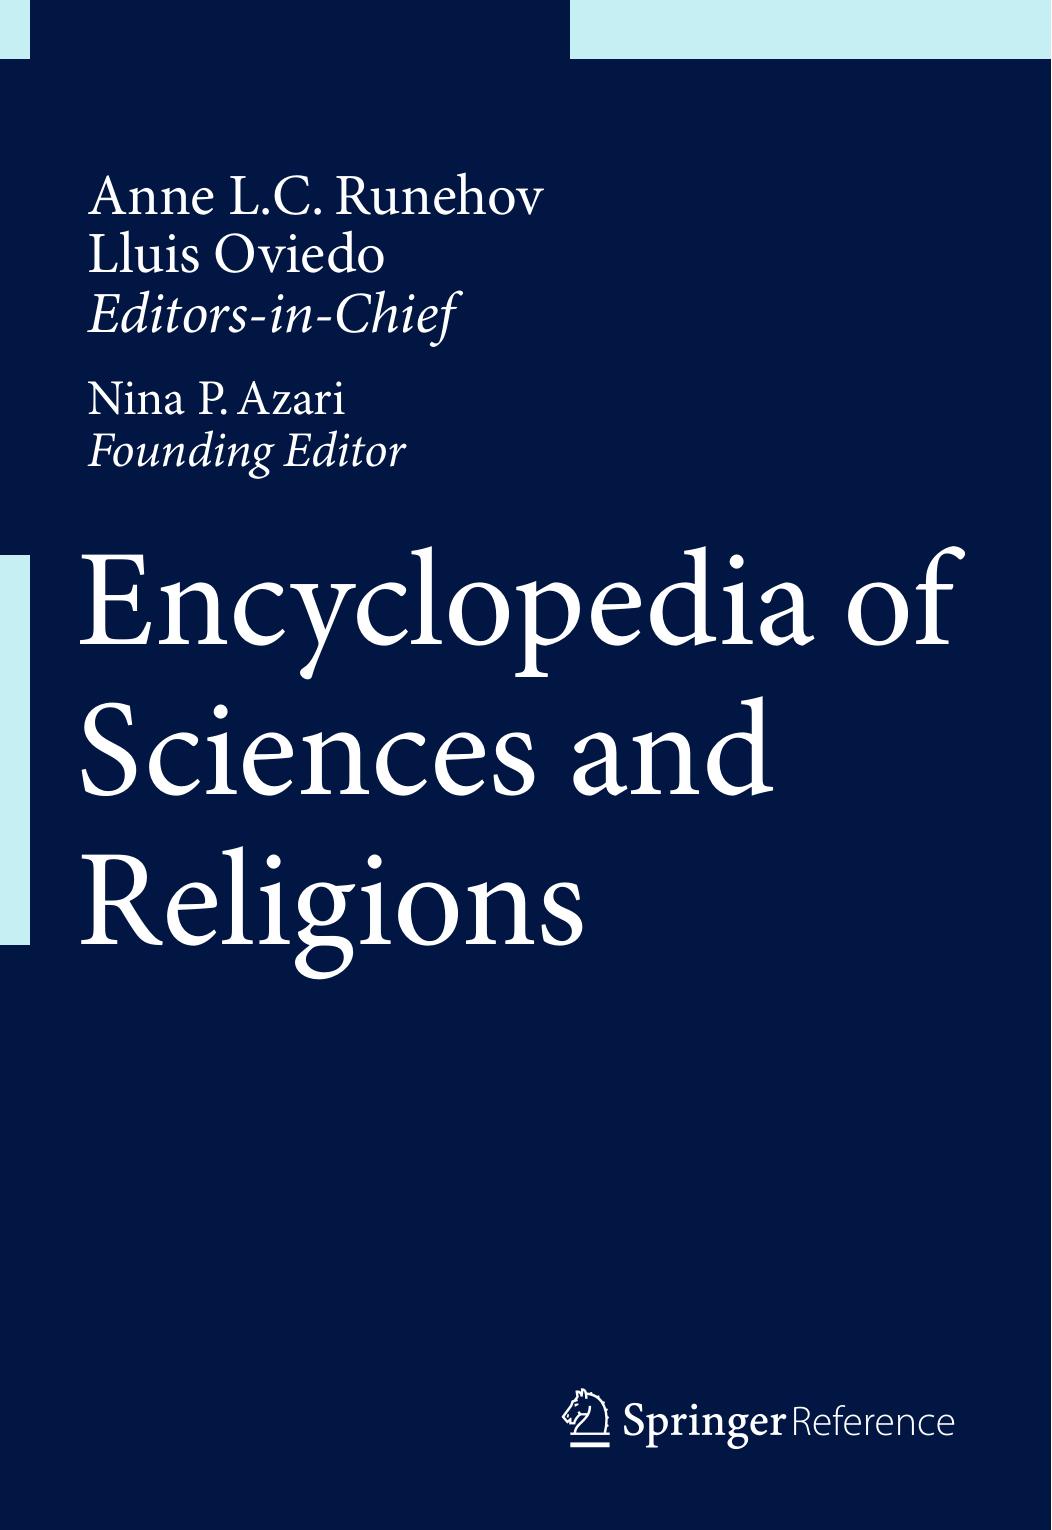 Encyclopedia of Sciences and Religions